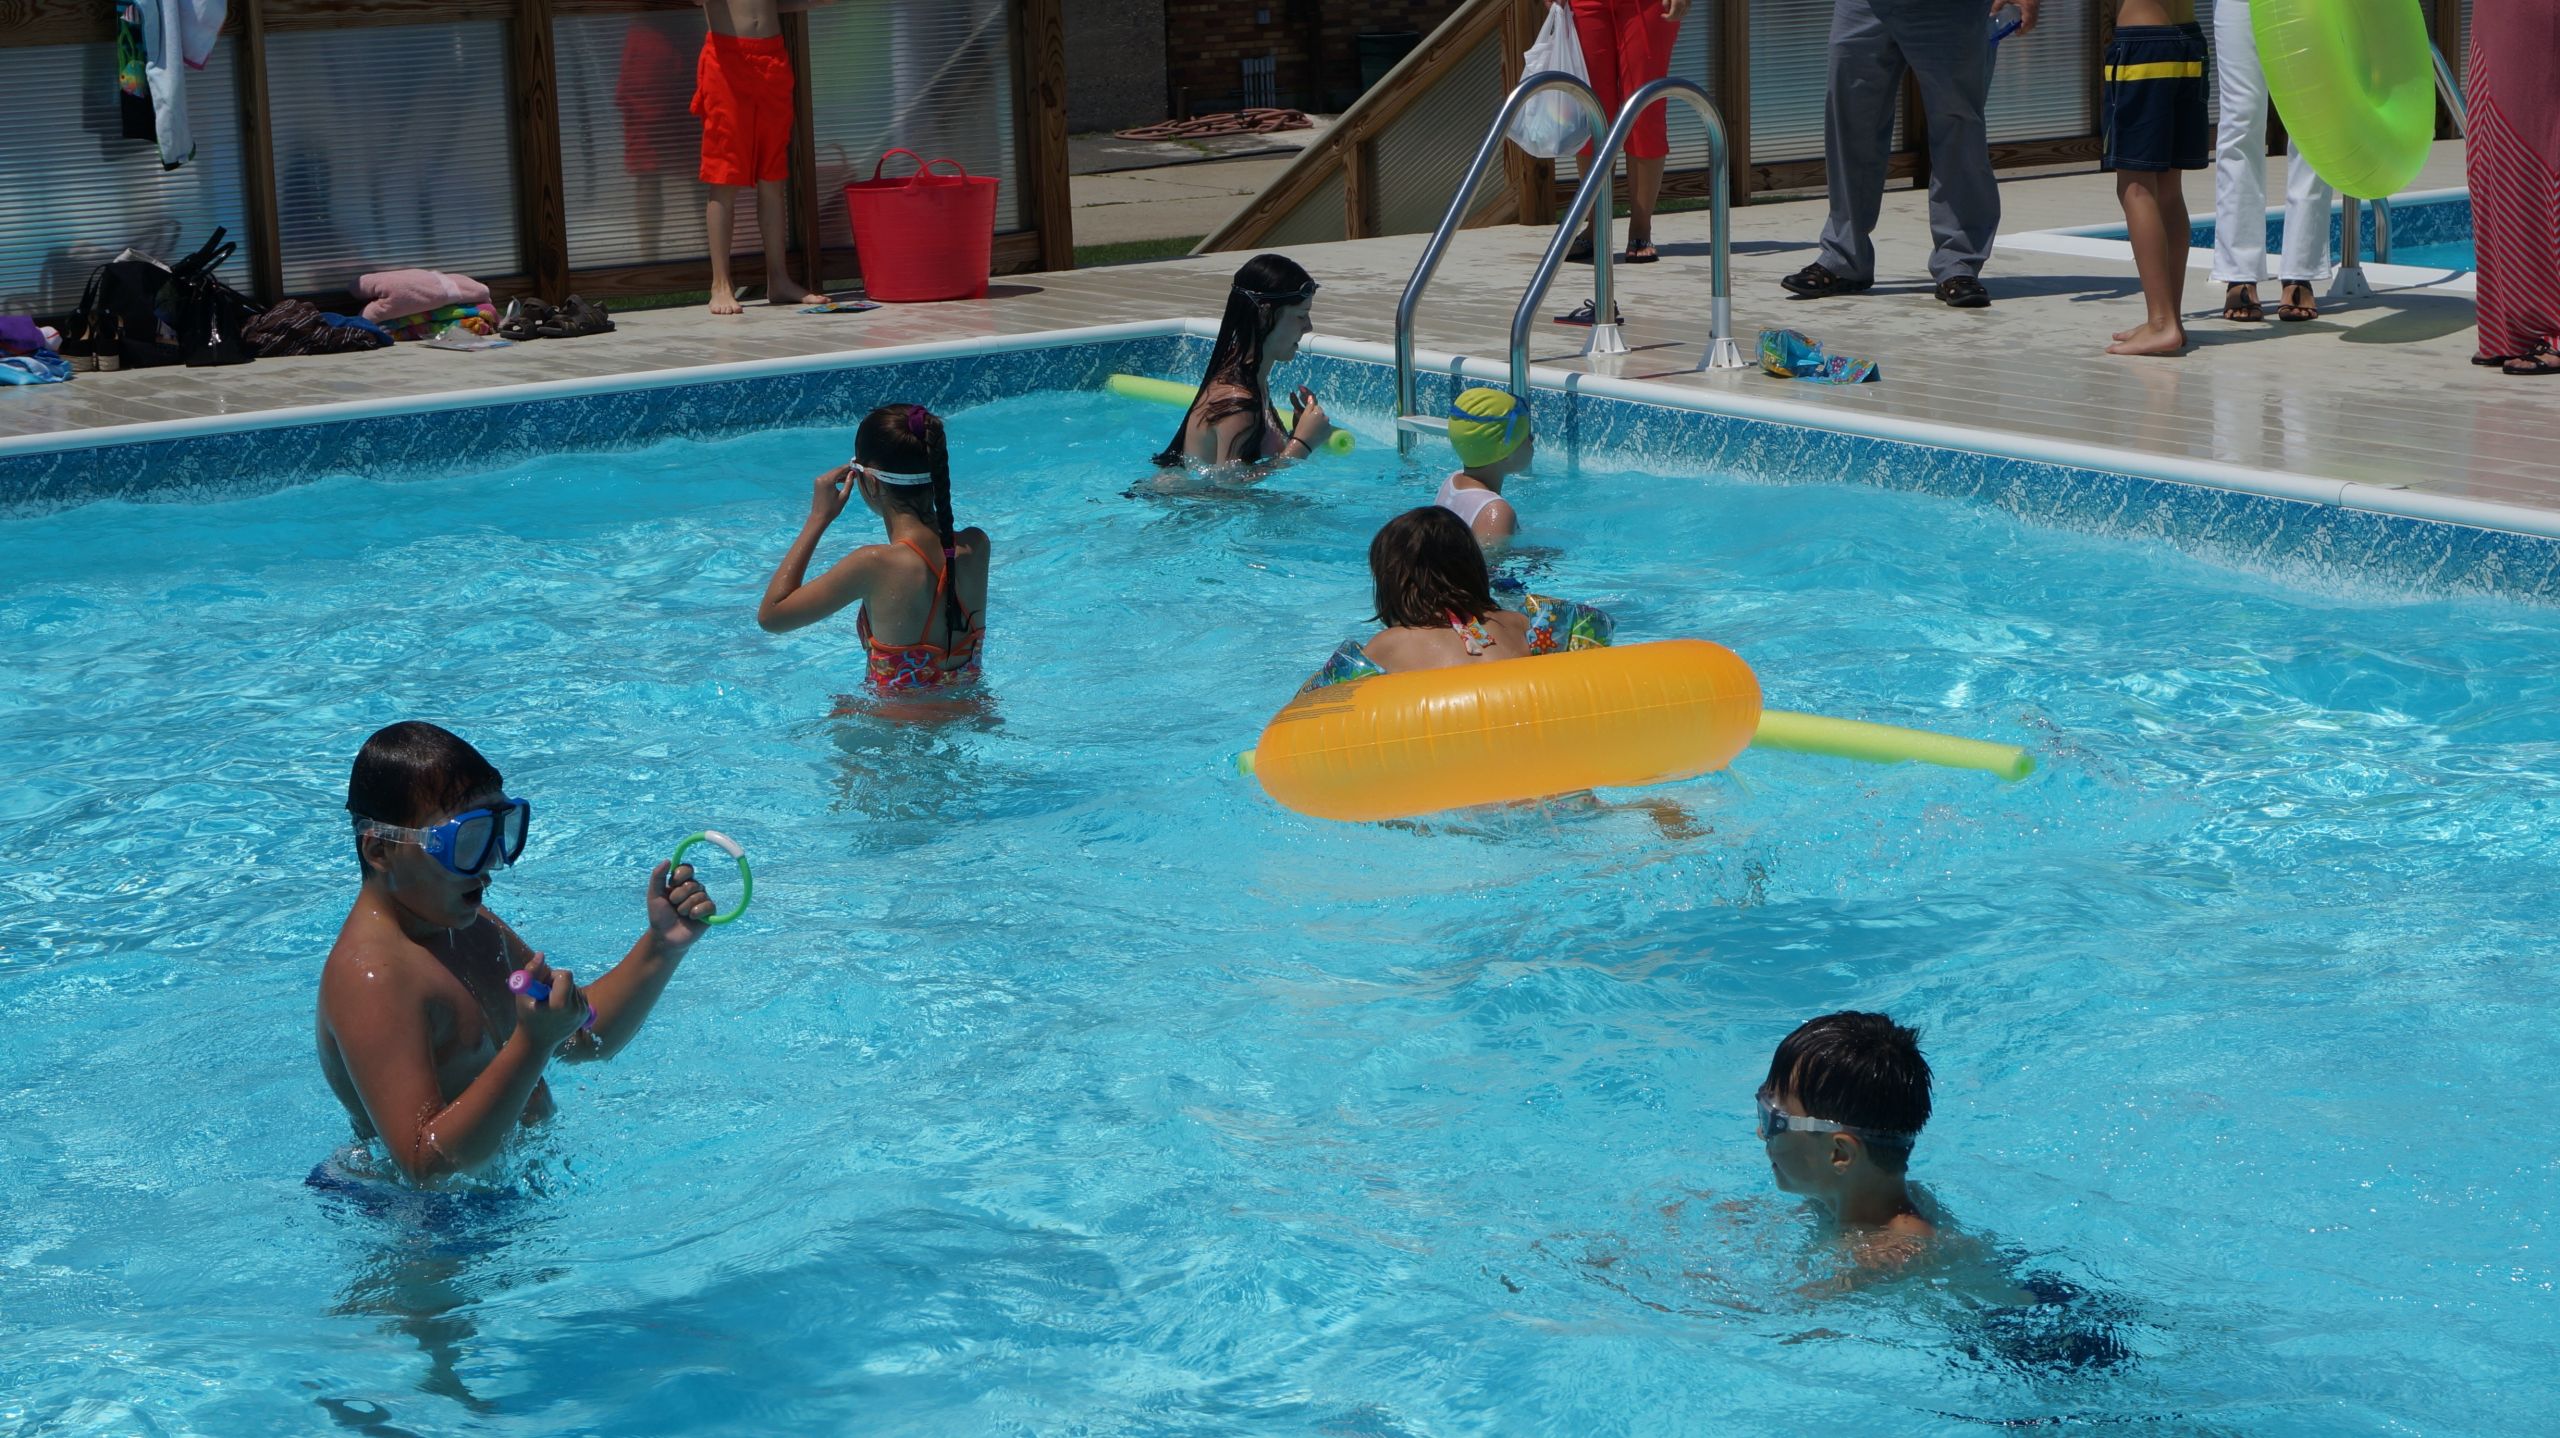 Swimming Pools Party Ideas
 Private Rentals for Pool Parties in Brooklyn